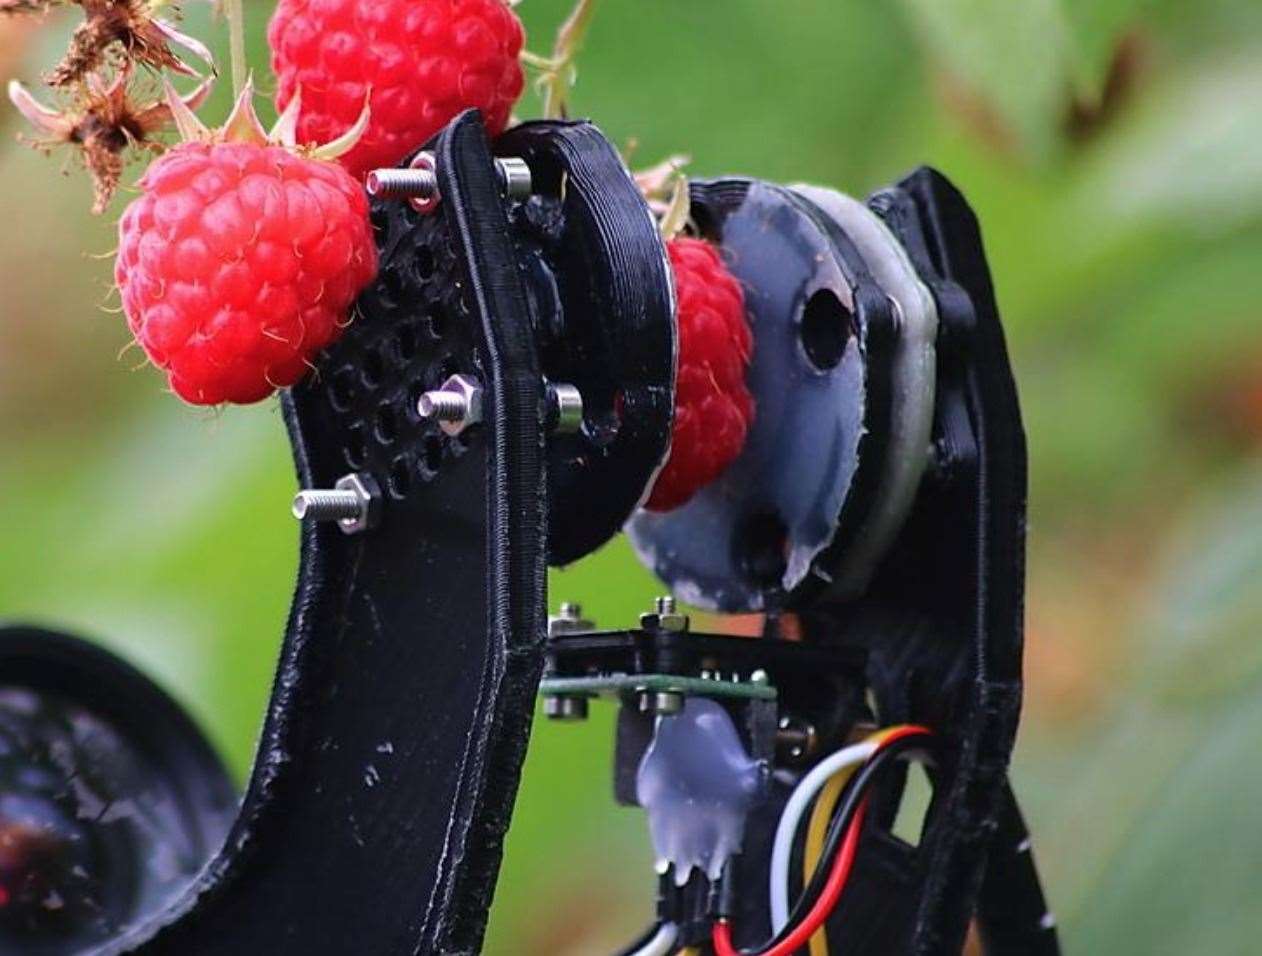 A fruit picking robot in action Picture: University of Portsmouth